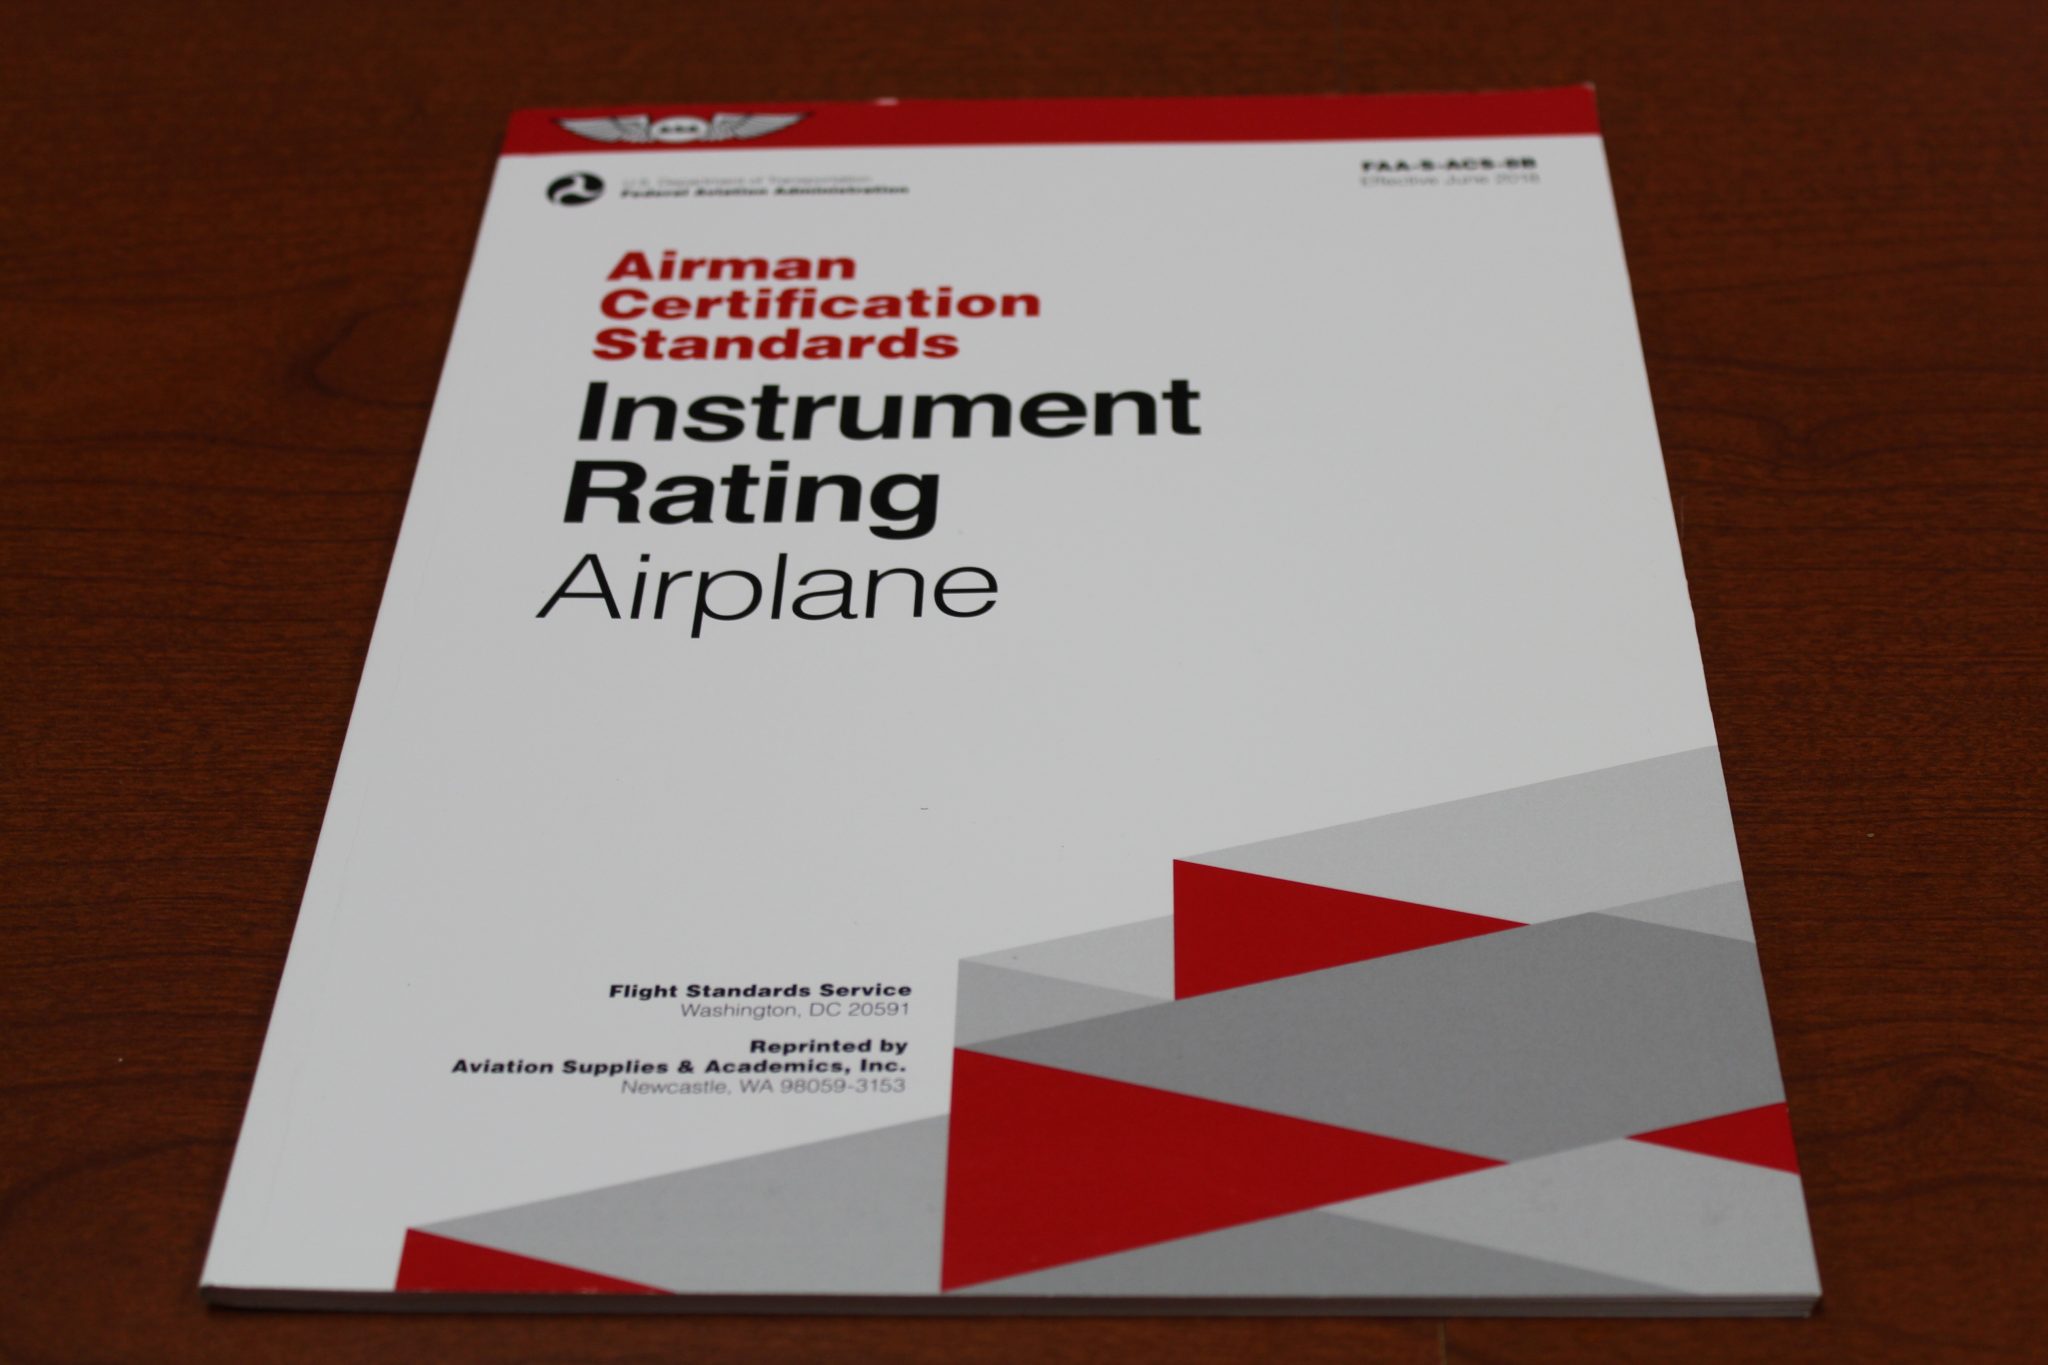 Airman Certification Standards by rating Illinois Aviation Academy